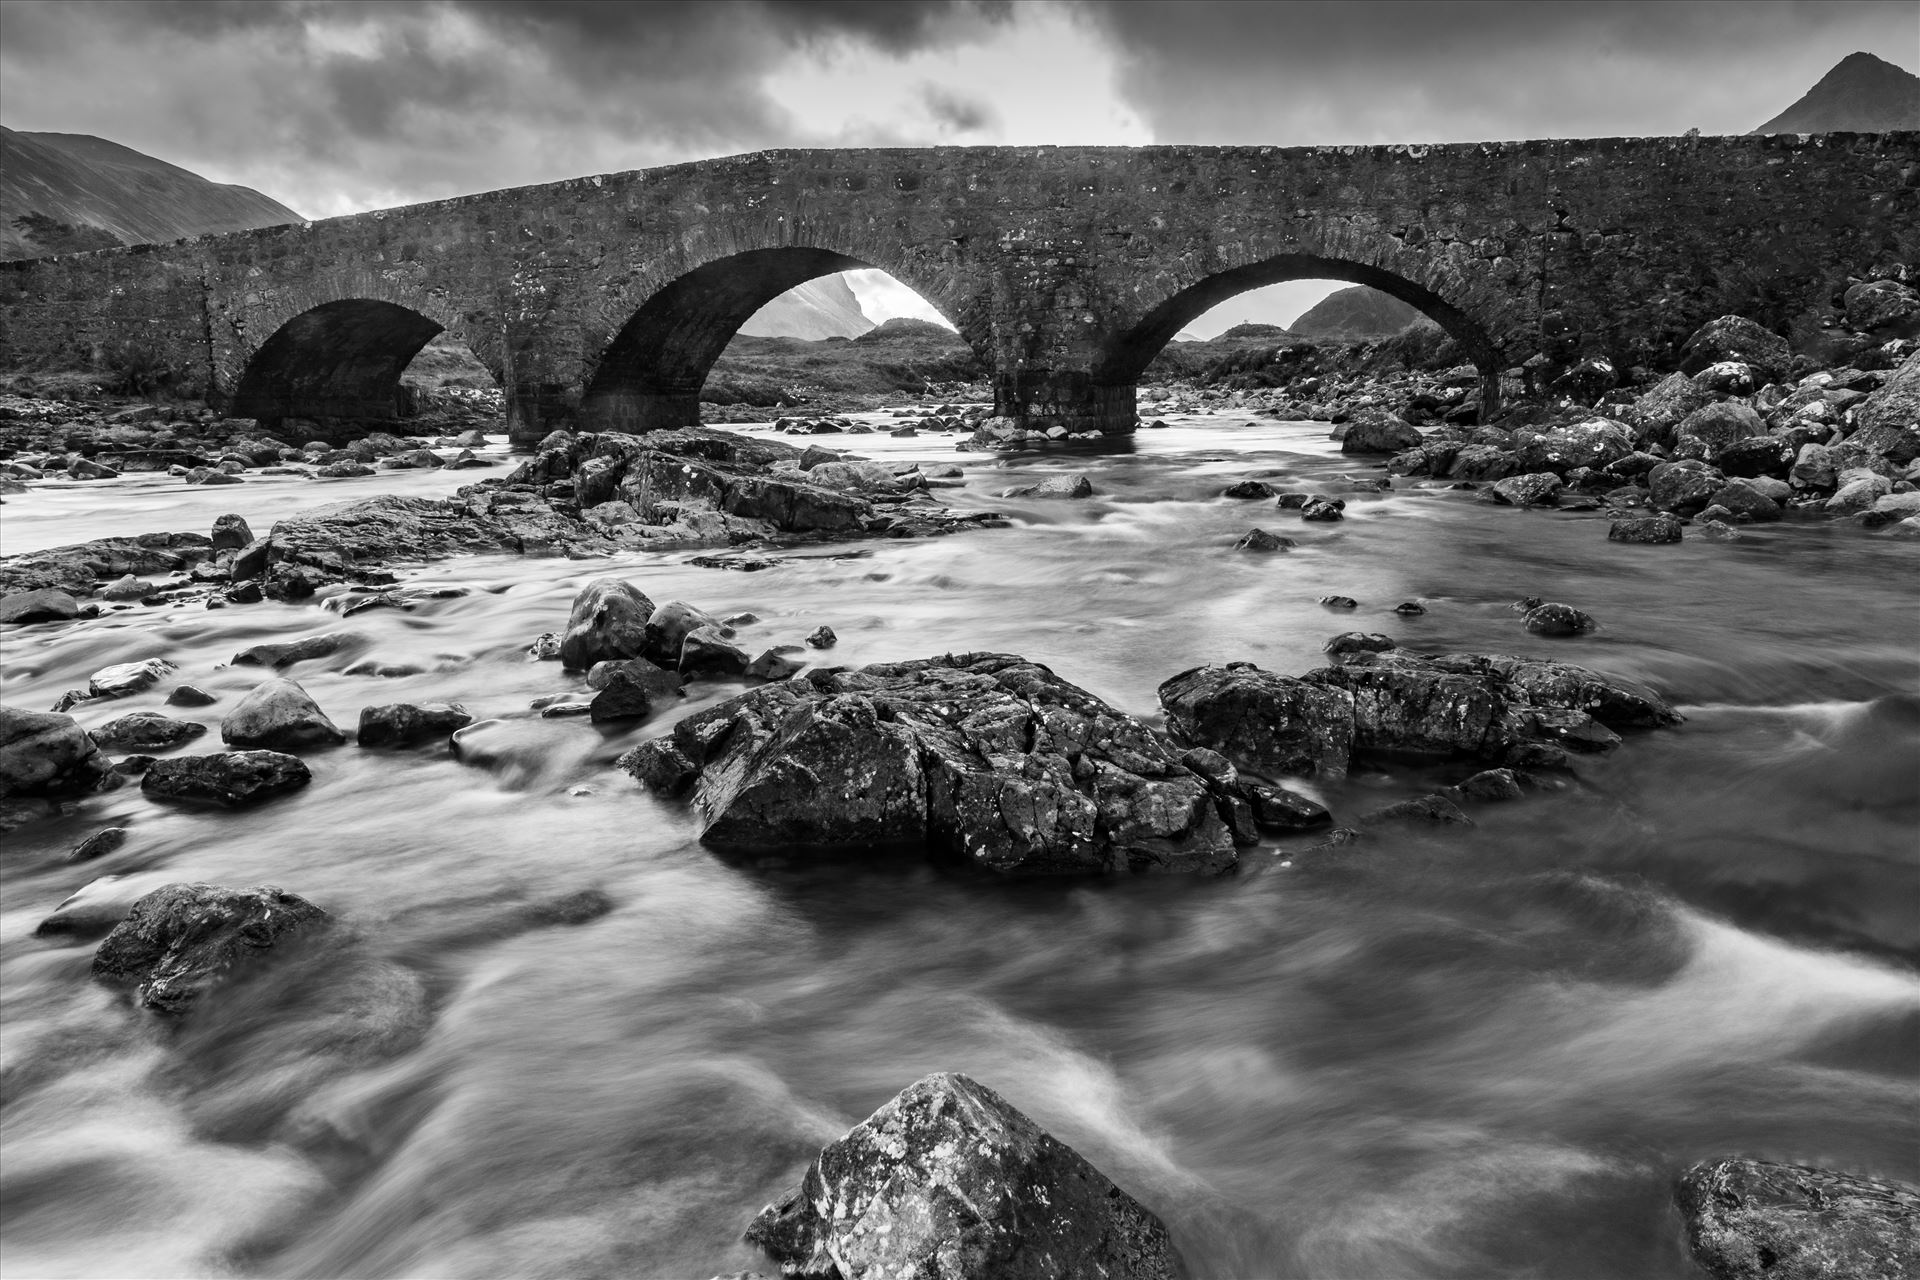 Sligachan Bridge, Isle of Skye (1) - Sligachan is situated at the junction of the roads from Portree, Dunvegan & Broadford on the Isle of Skye. The Cullin mountains can be seen in the background. by philreay